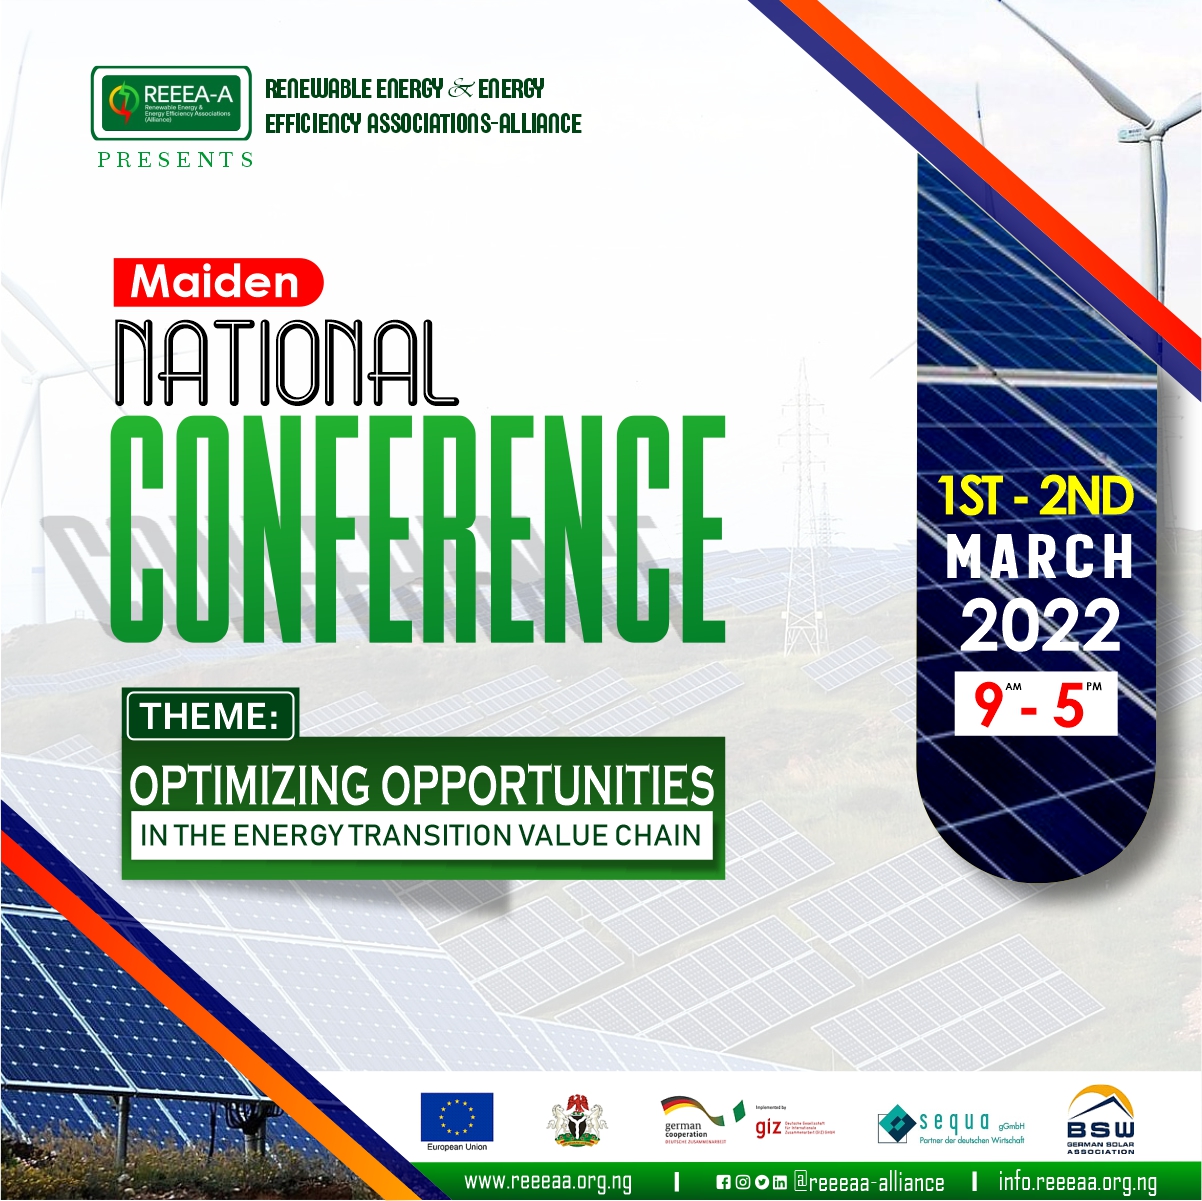 You are currently viewing ‘REEEA Alliance’ Organizes Maiden National Conference On Renewable Energy And Energy Efficiency In Nigeria